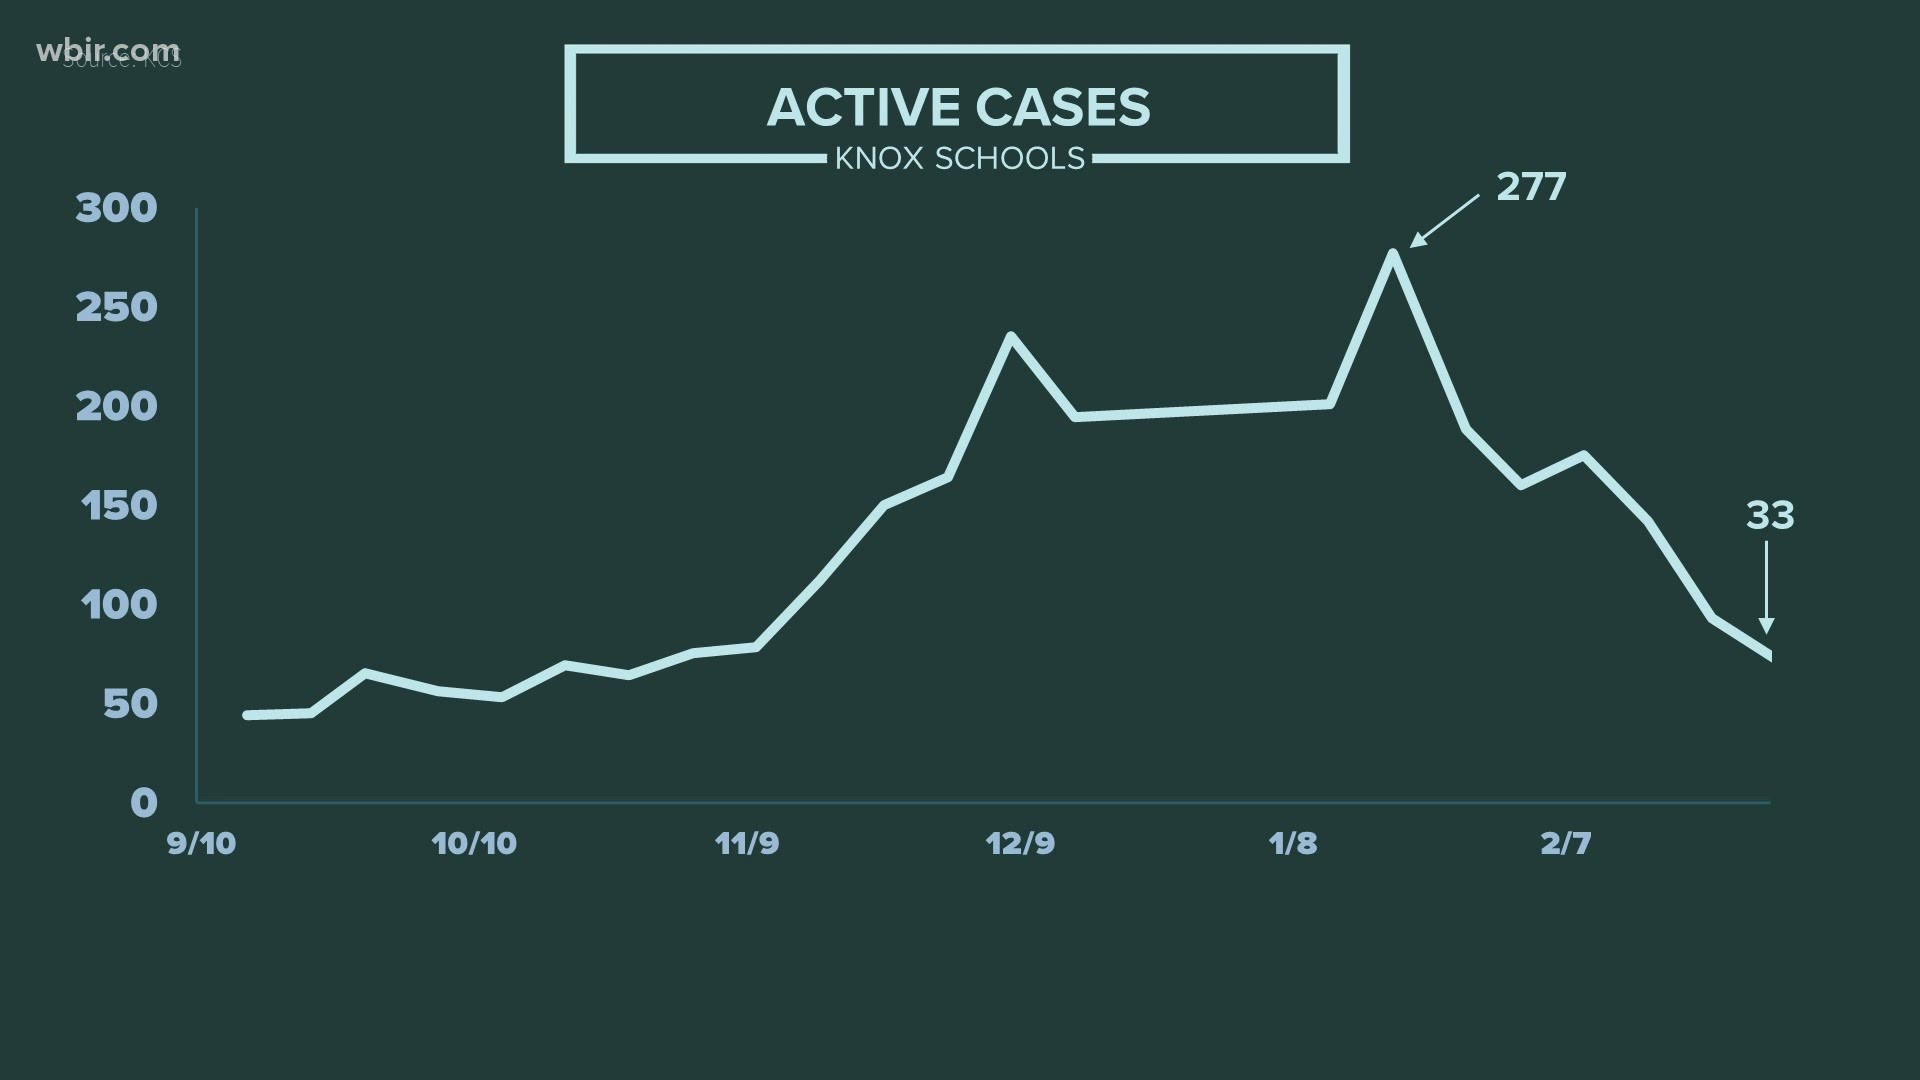 Active cases in Knox County Schools peaked around mid-January, at around 200 in a district with almost 70,000 staff and students.